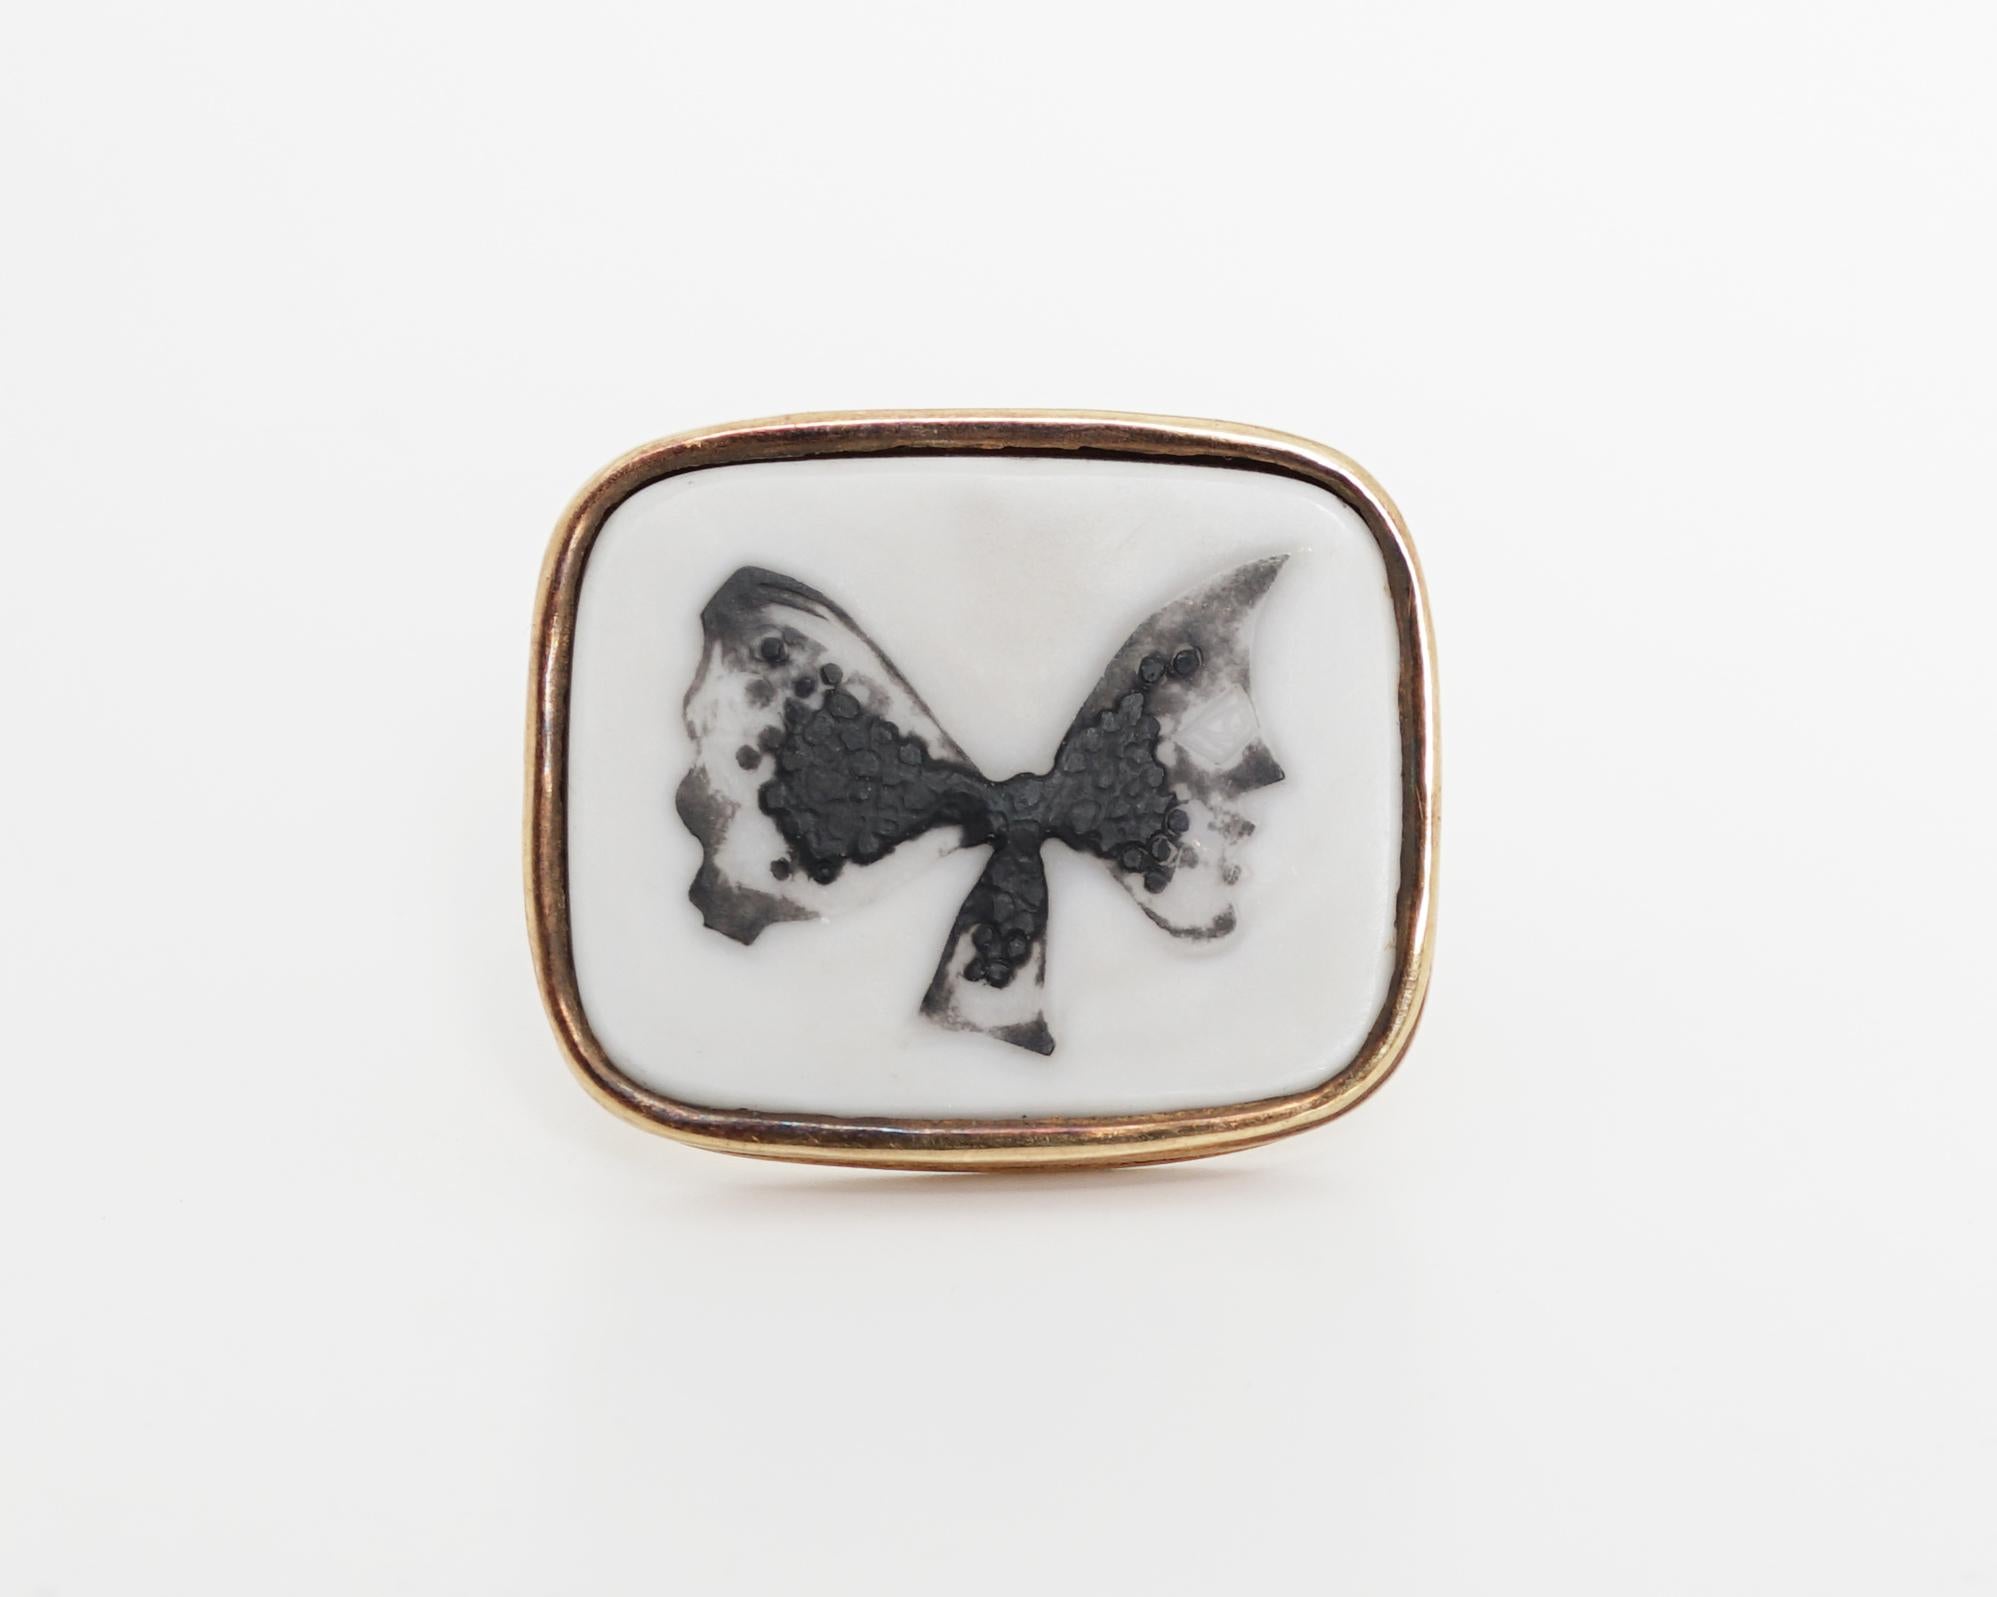 Express Shipping still available during Lockdown

Very Rare 18K gold (marked), Onyx and White Agate cameo Brooch, called 'Selene' by Georges Braque (1882-1963), inventor of cubism. 

This Brooch was manufactured by Heger de Loewenfeld after the